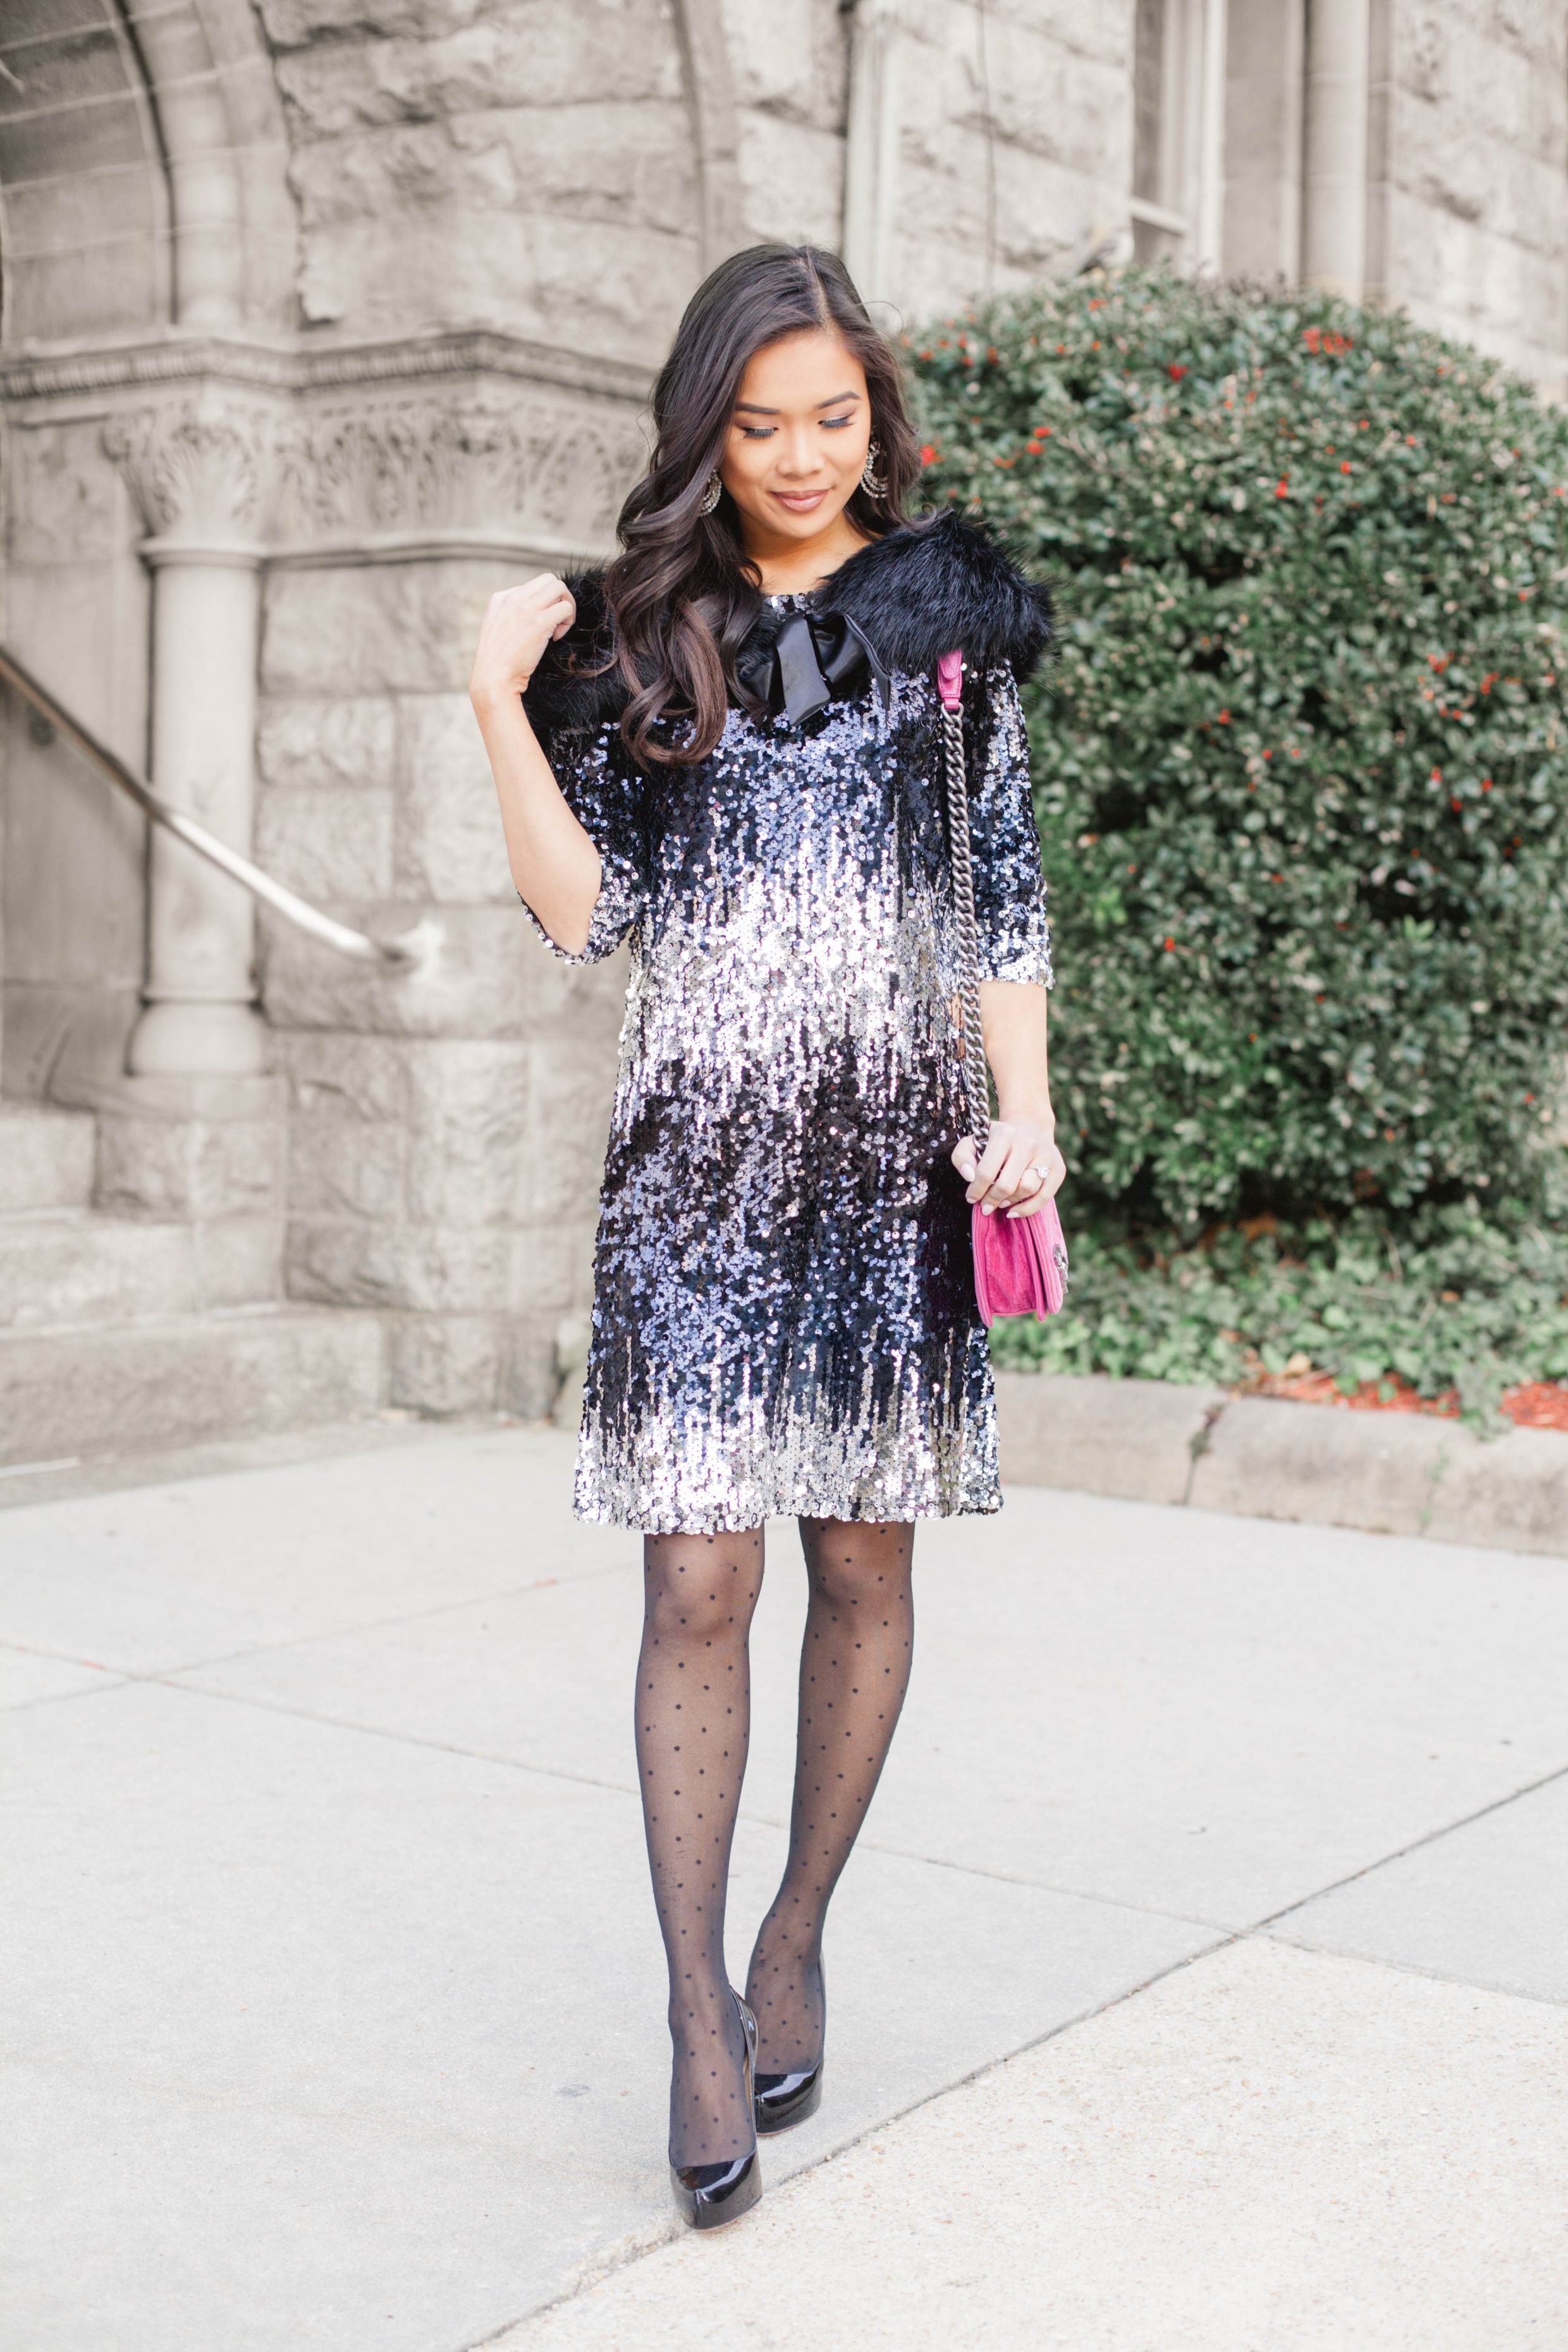 Holiday glam look with a sequin dress, faux fur stole and dotted tights